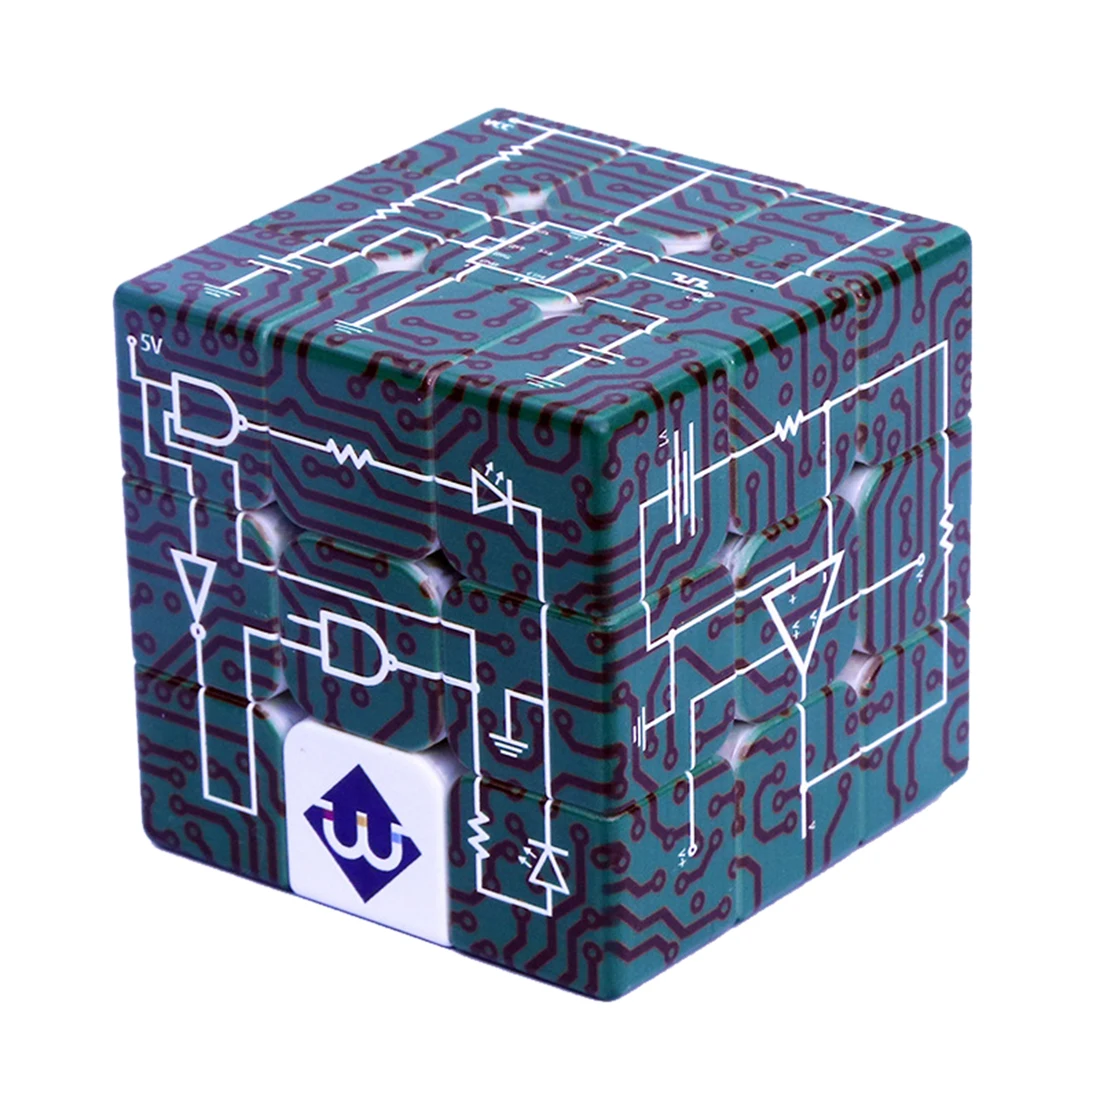 

Electric Circuits 3x3x3 Relief Effect Magic Cube IQ Puzzle Cube Game for Blind Man